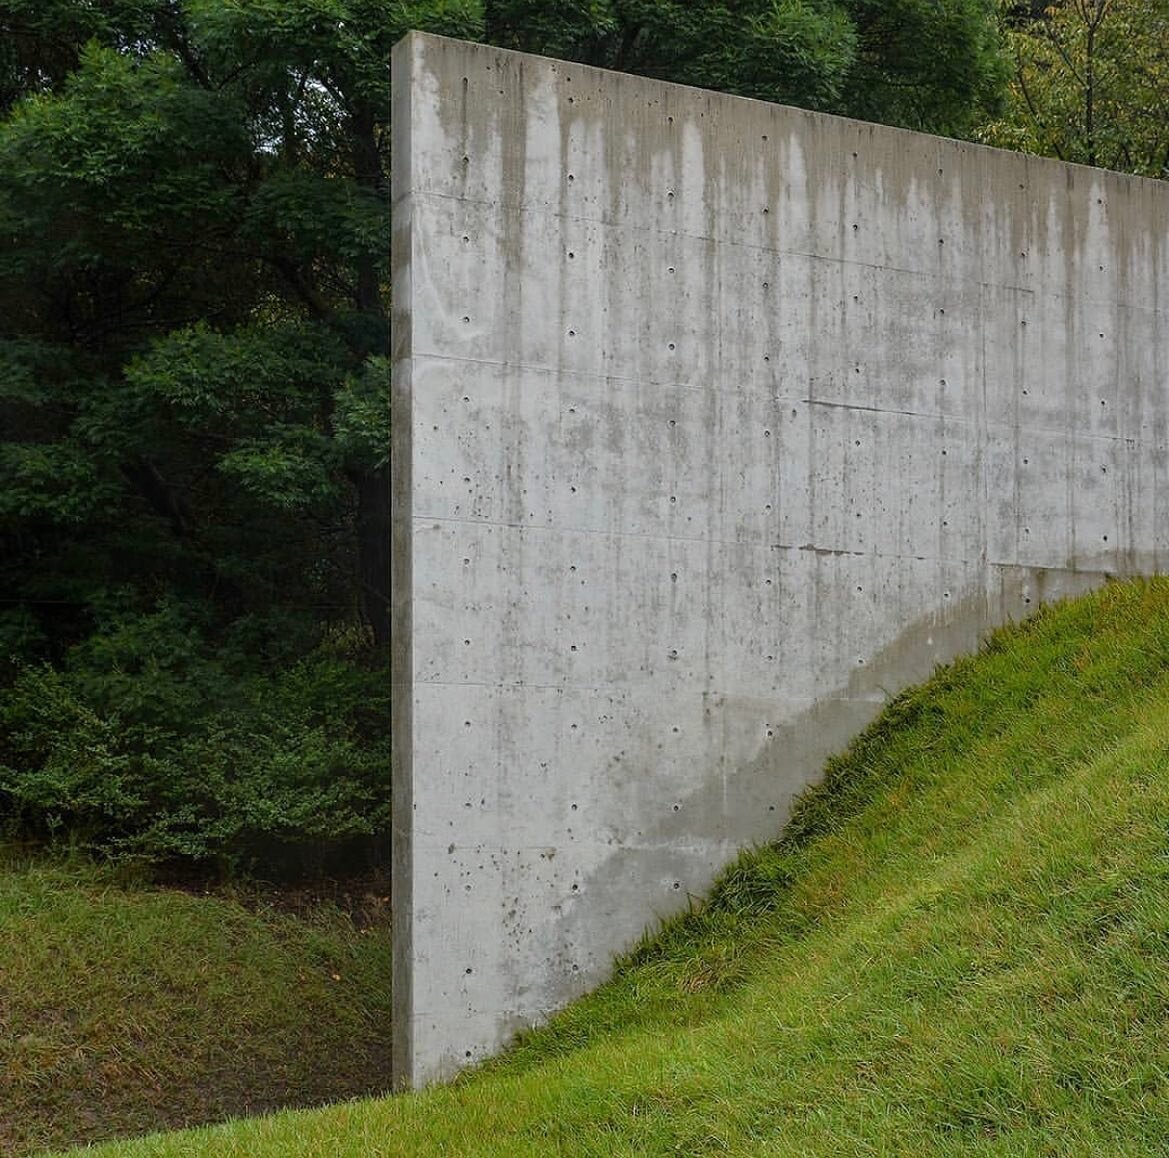 The Lee Ufan Museum, designed by the Japanese architect Tadao Ando, house paintings and sculptures by Lee spanning from the 70s and into present day.
⁠⁠
A landmark on the island of Naoshima, Japan, the semi-underground structure is located in gentle 